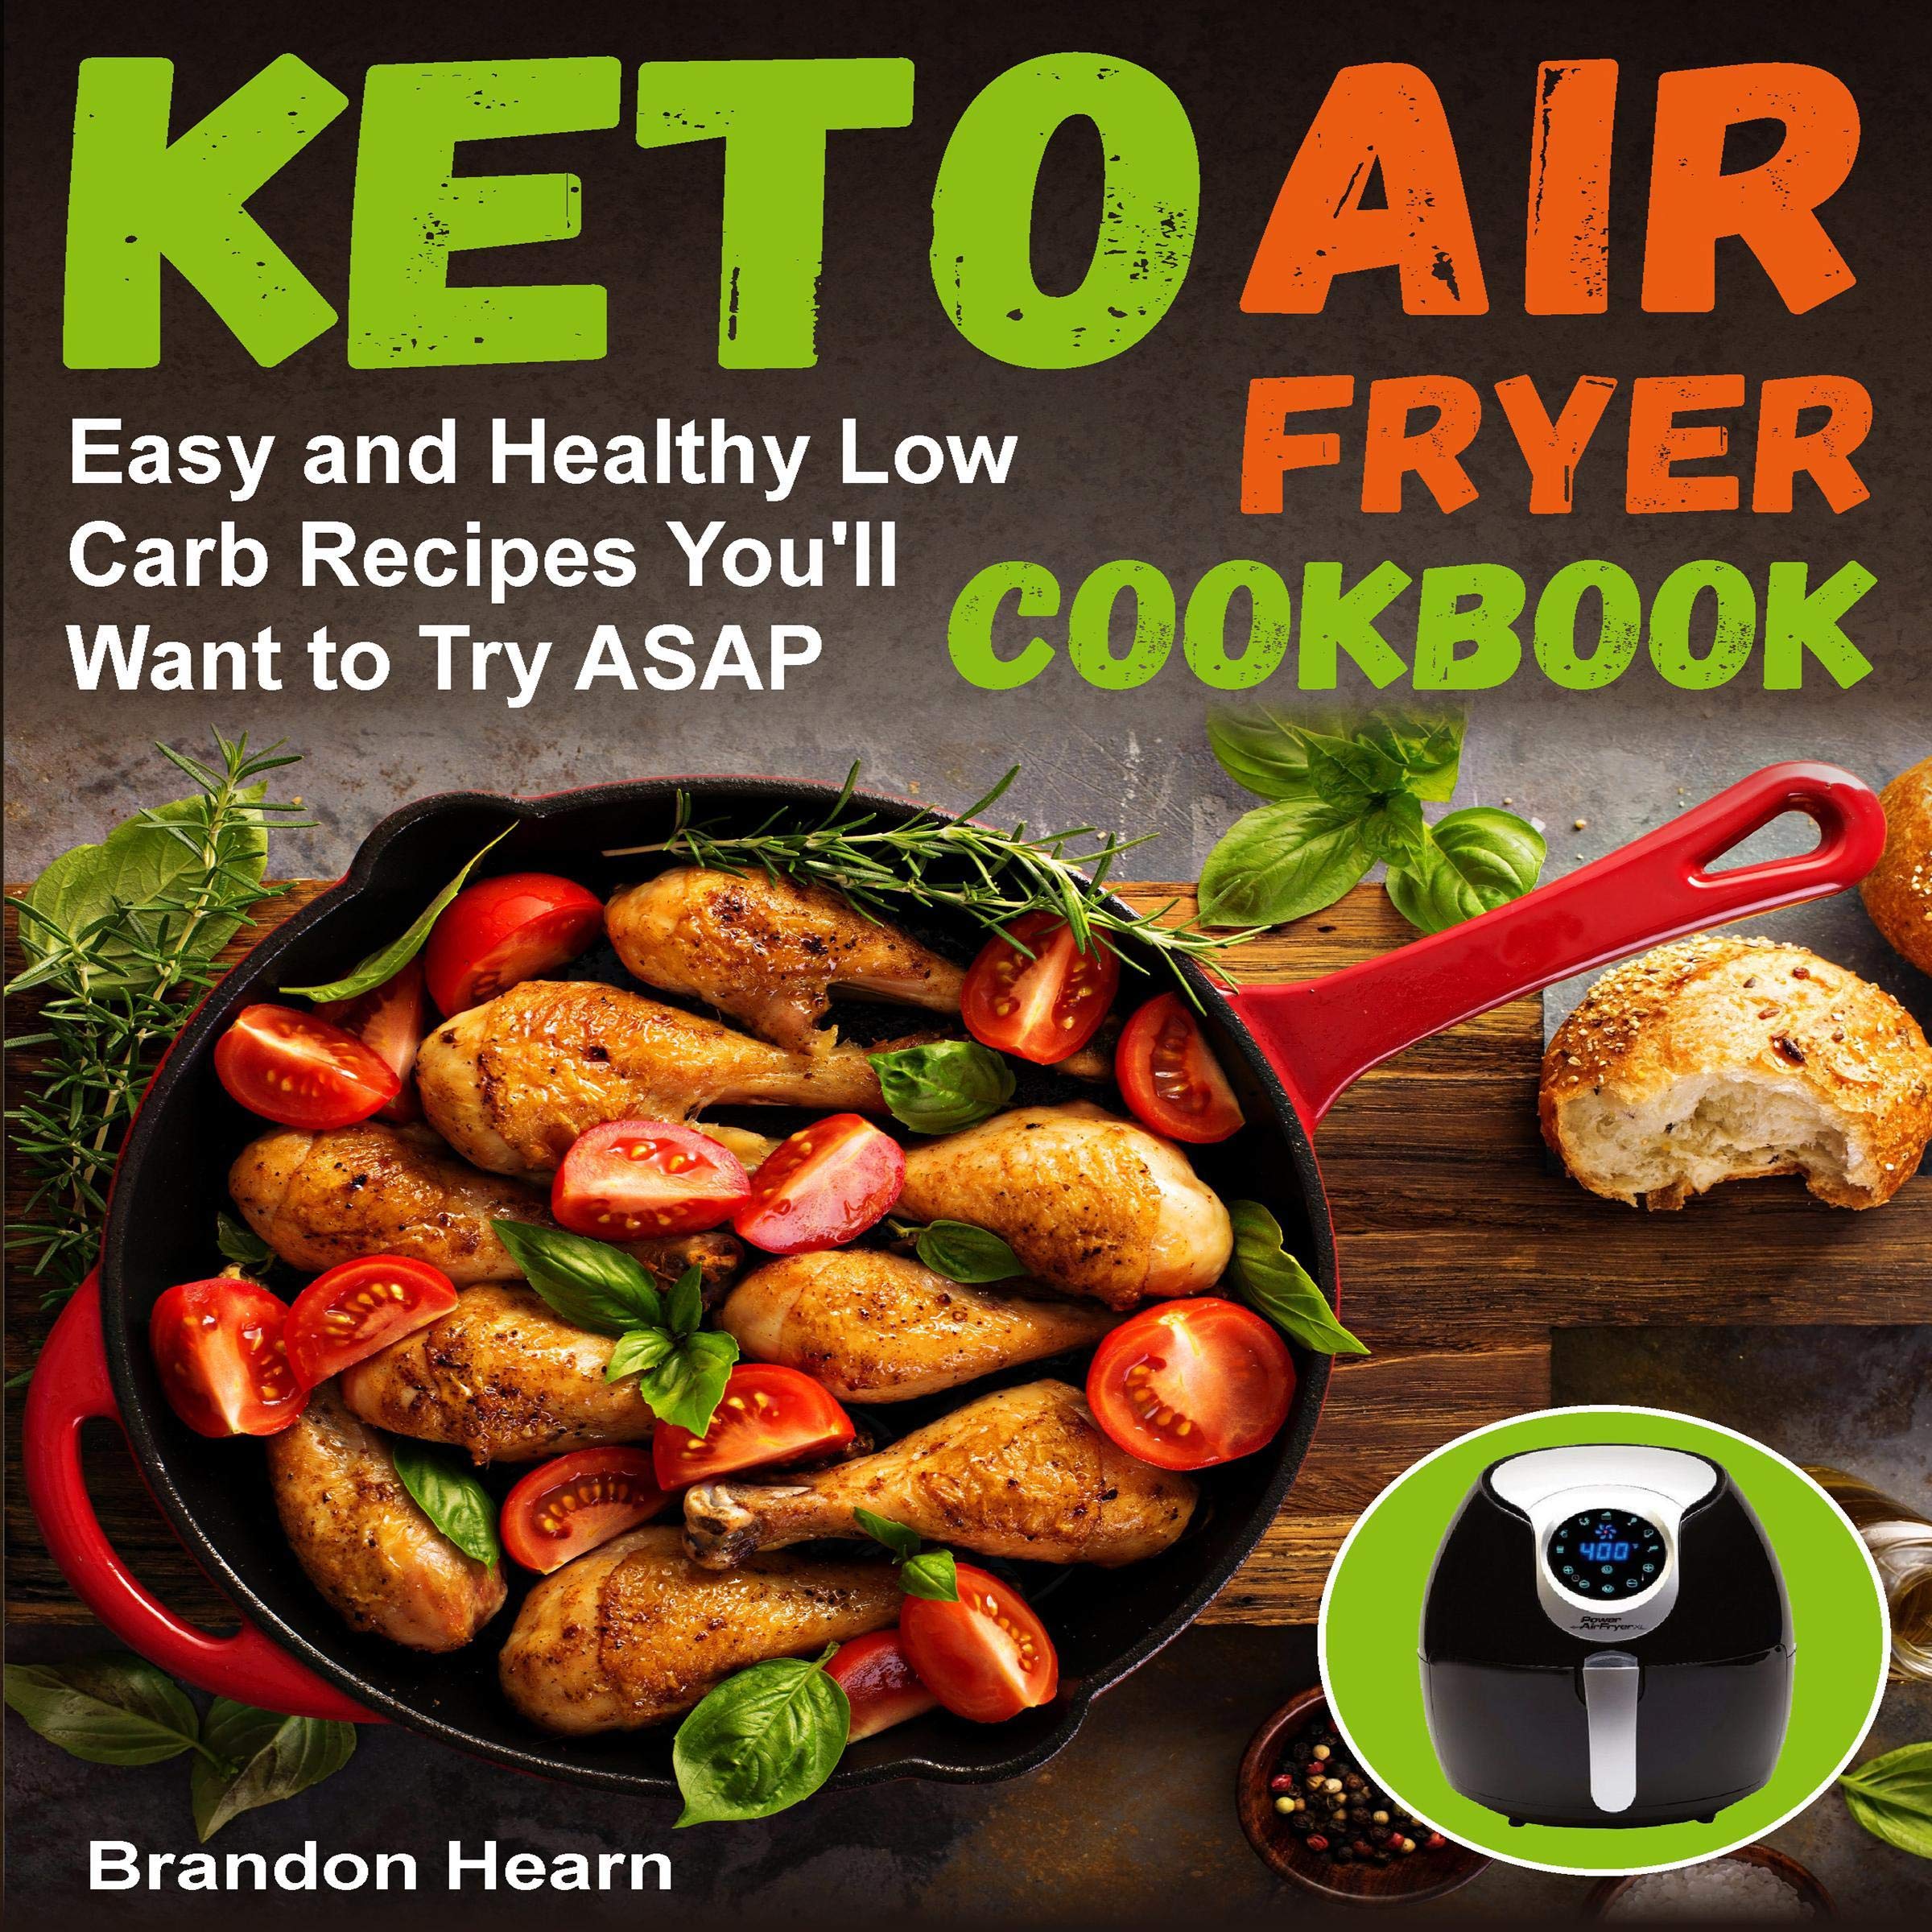 Keto Air Fryer Cookbook: Easy and Healthy Low Carb Recipes You’ll Want to Try ASAP